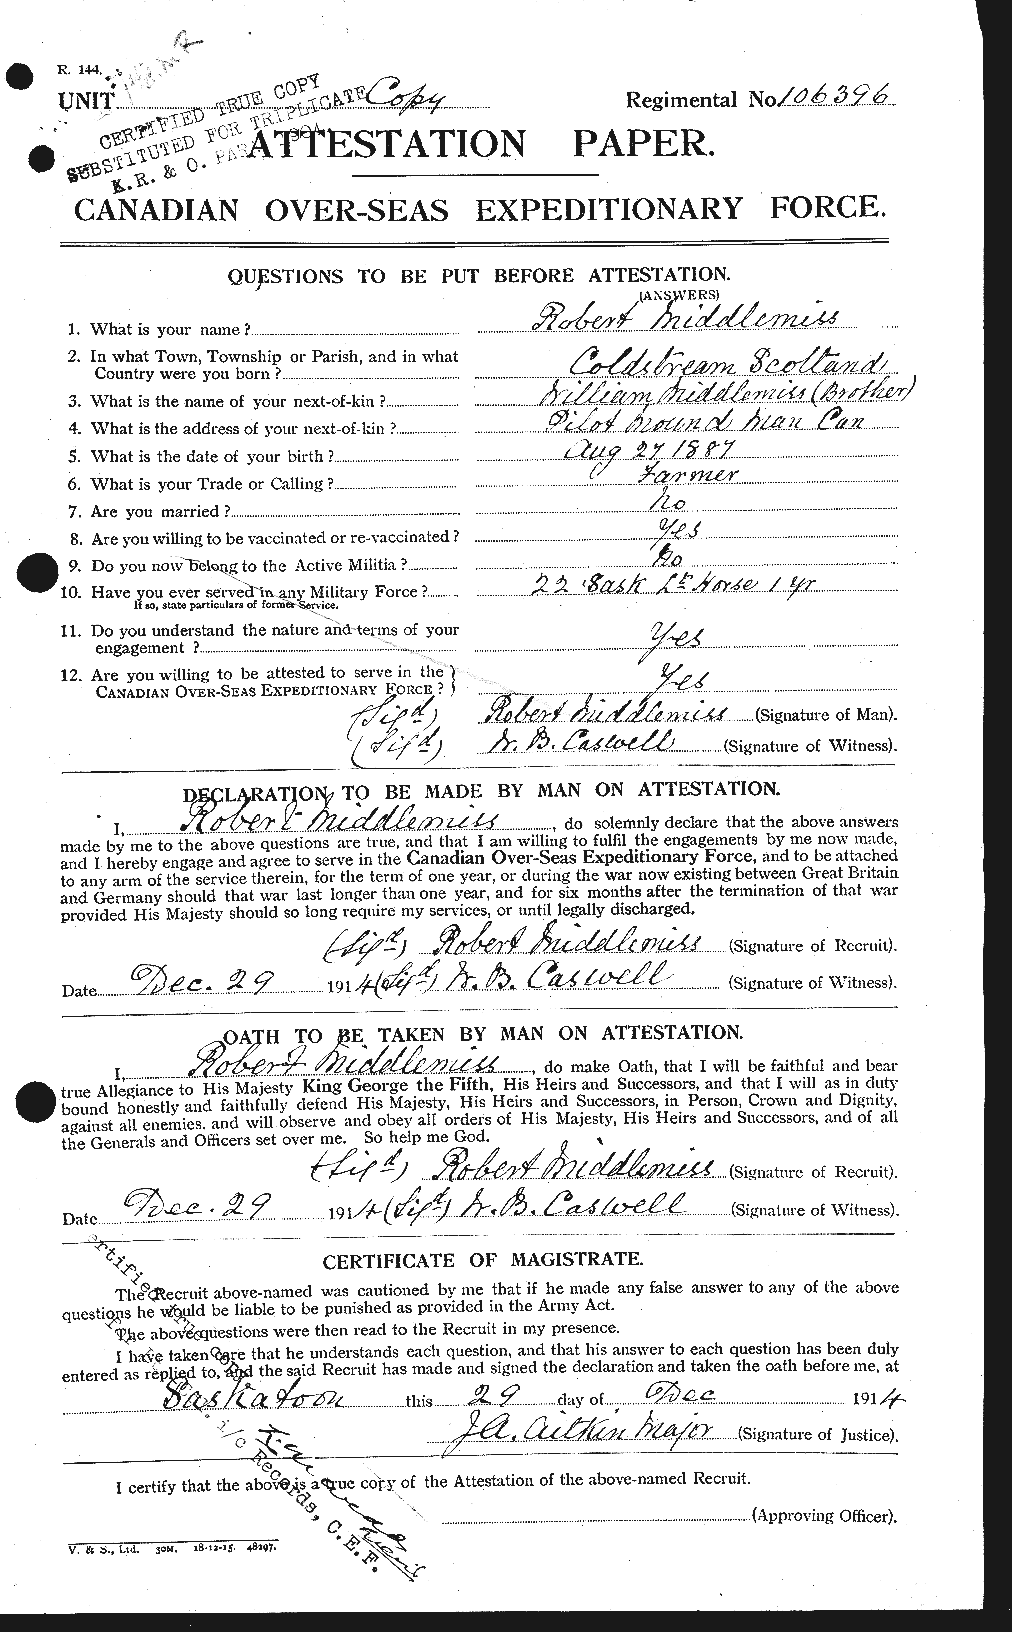 Personnel Records of the First World War - CEF 493009a